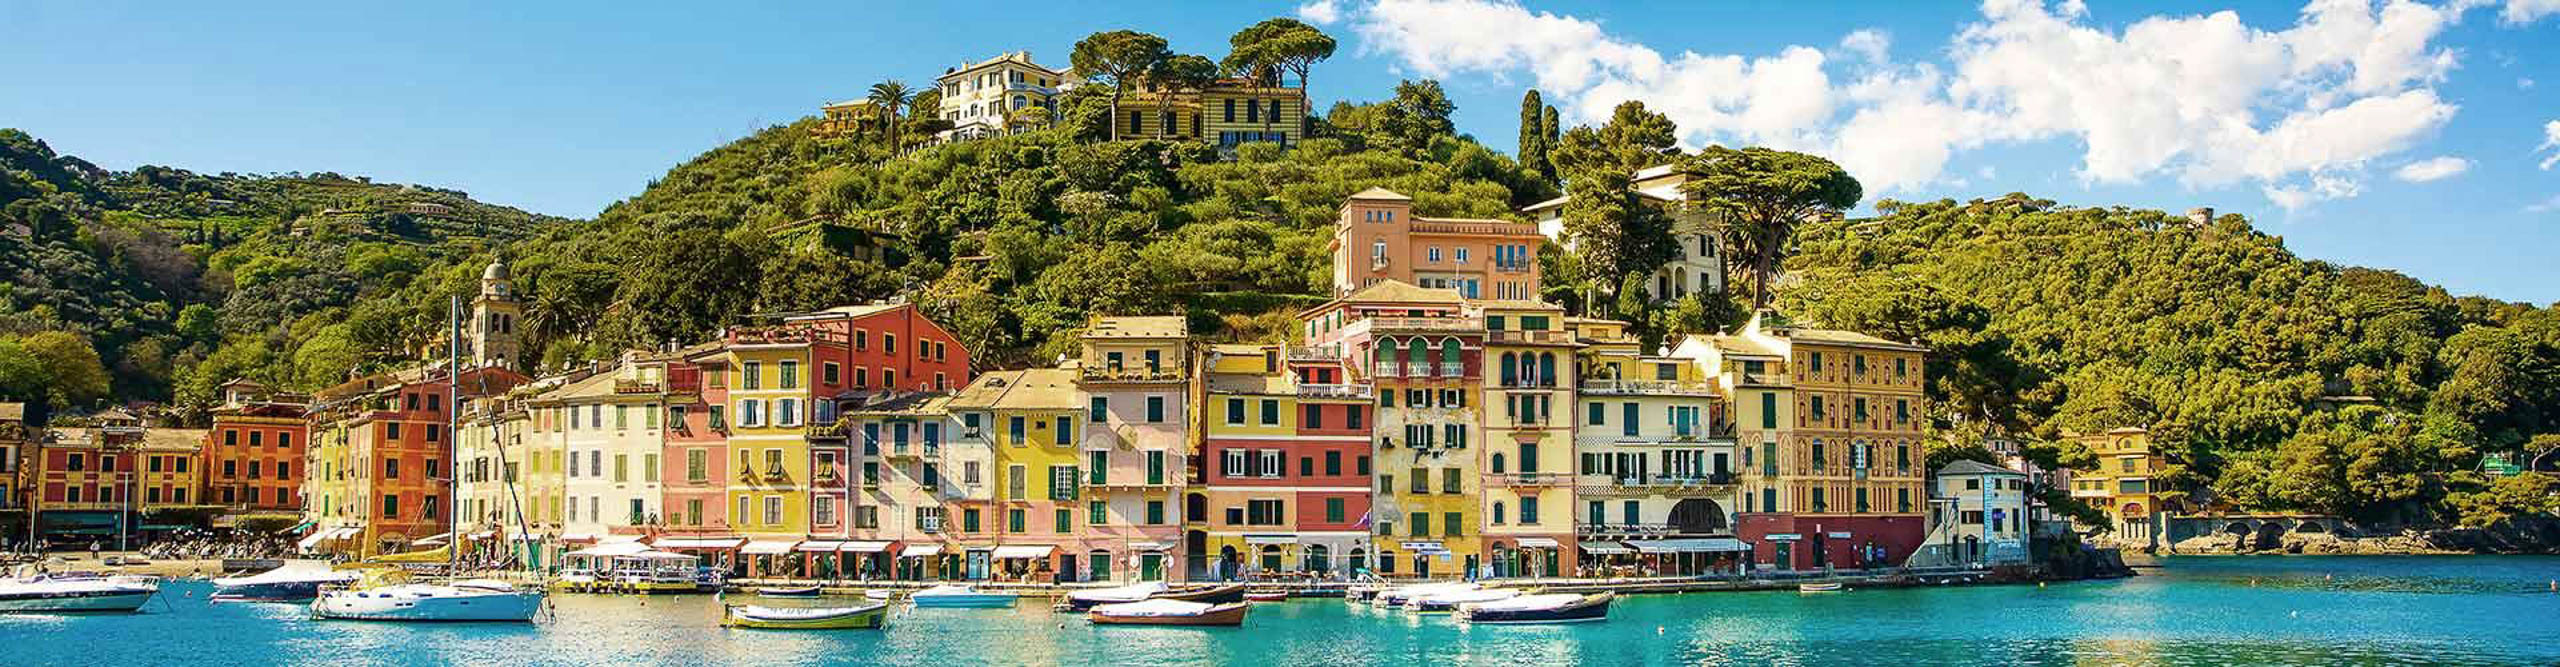 View from the water of a town on the Italian coast 